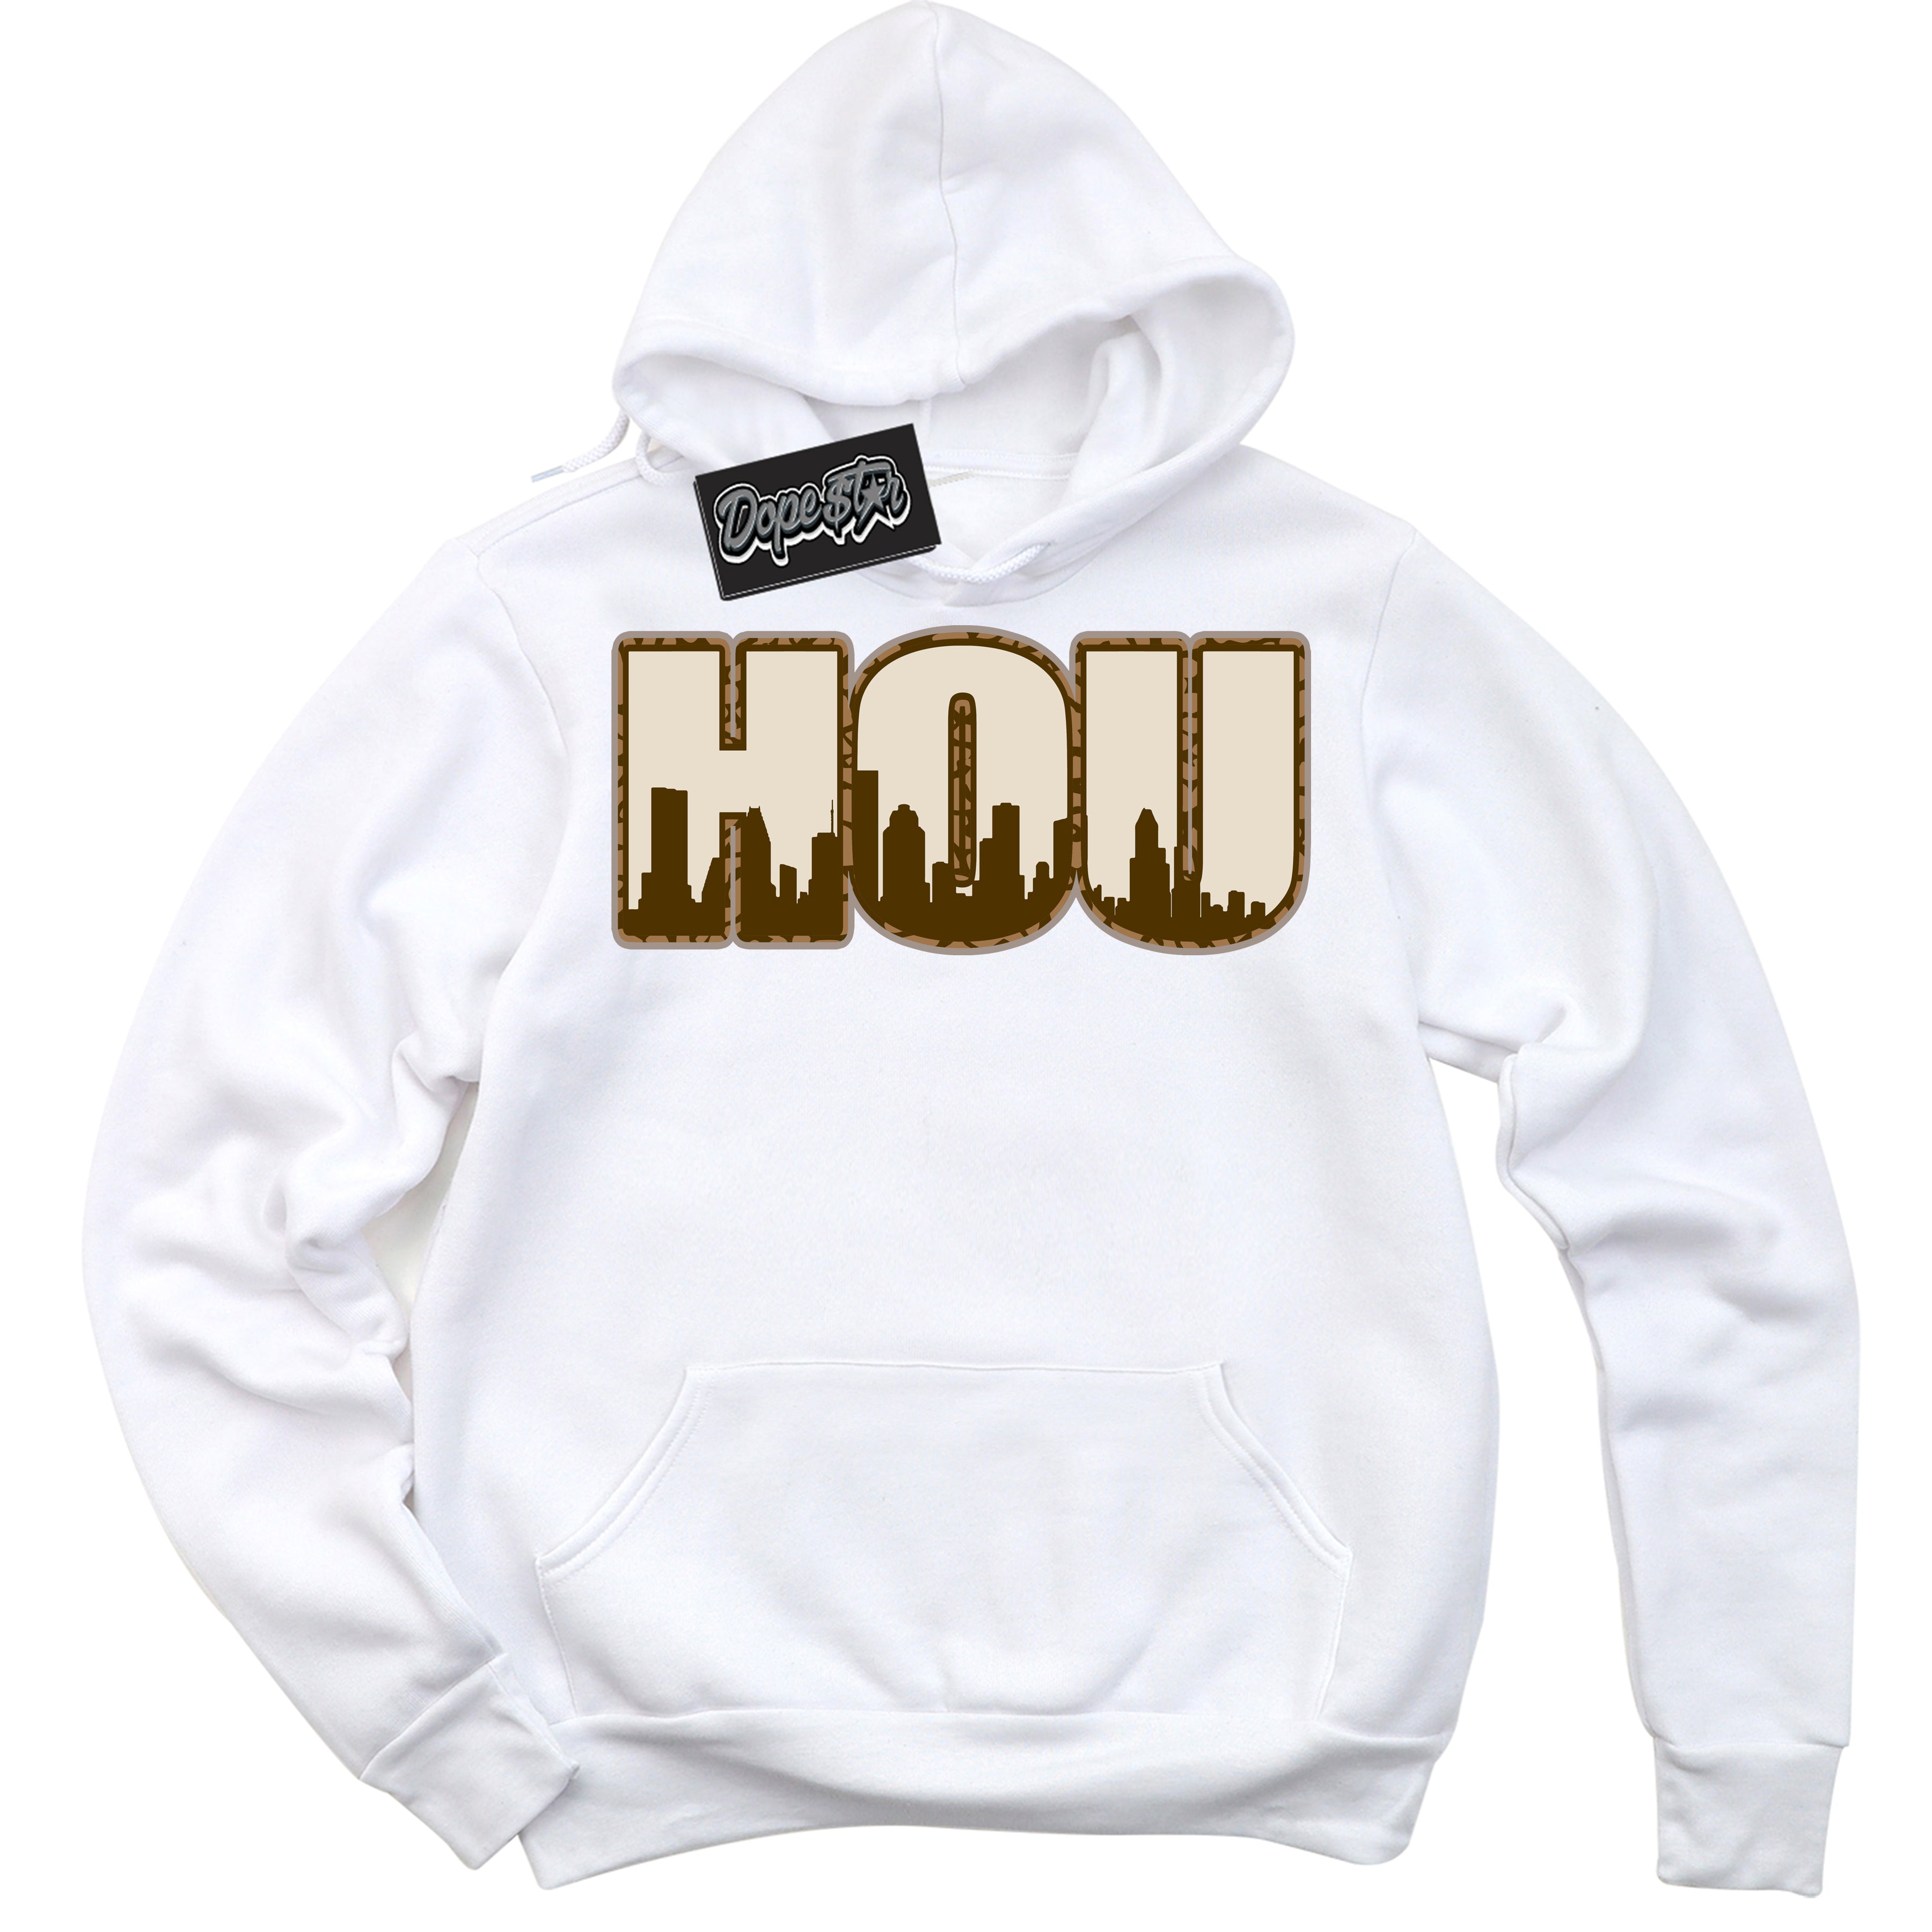 Cool White Graphic DopeStar Hoodie with “ Houston “ print, that perfectly matches Palomino 3s sneakers